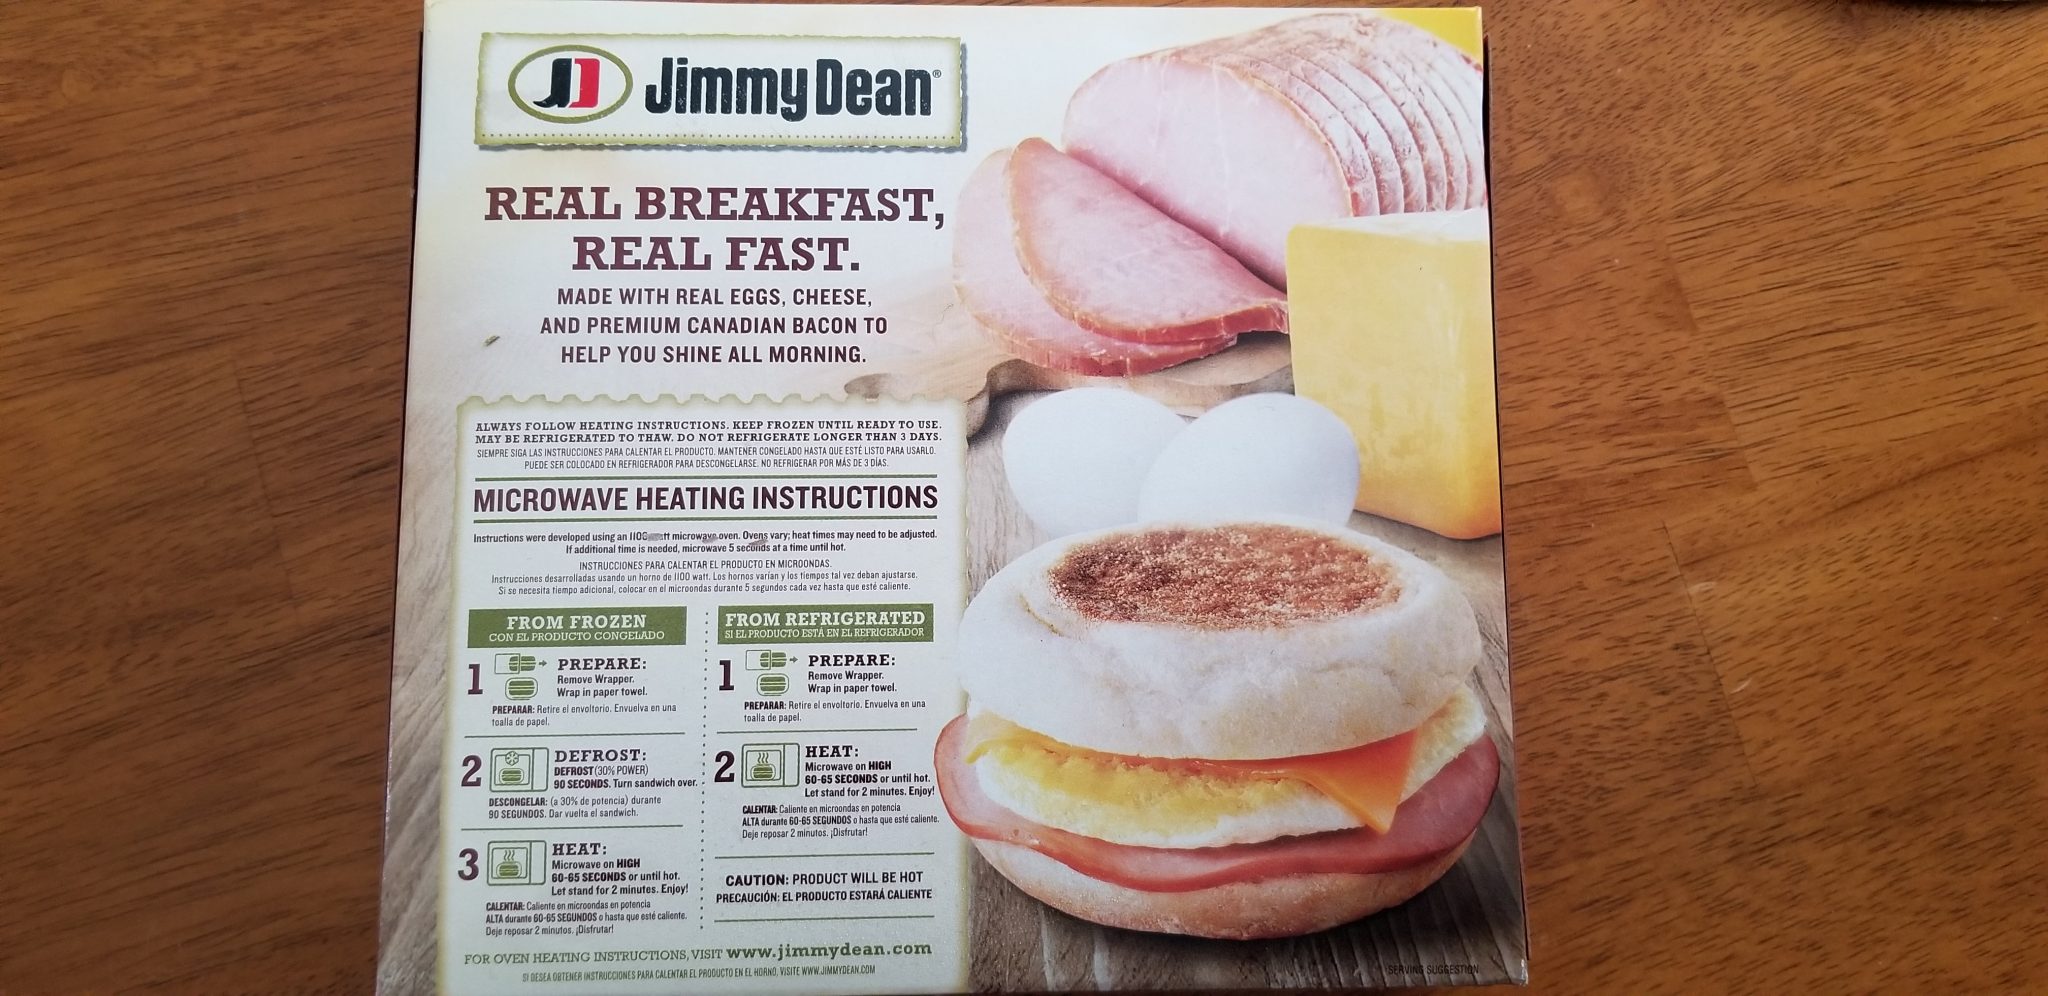 Jimmy Dean English Muffin, Canadian Bacon, Whole Egg and Cheese back of box